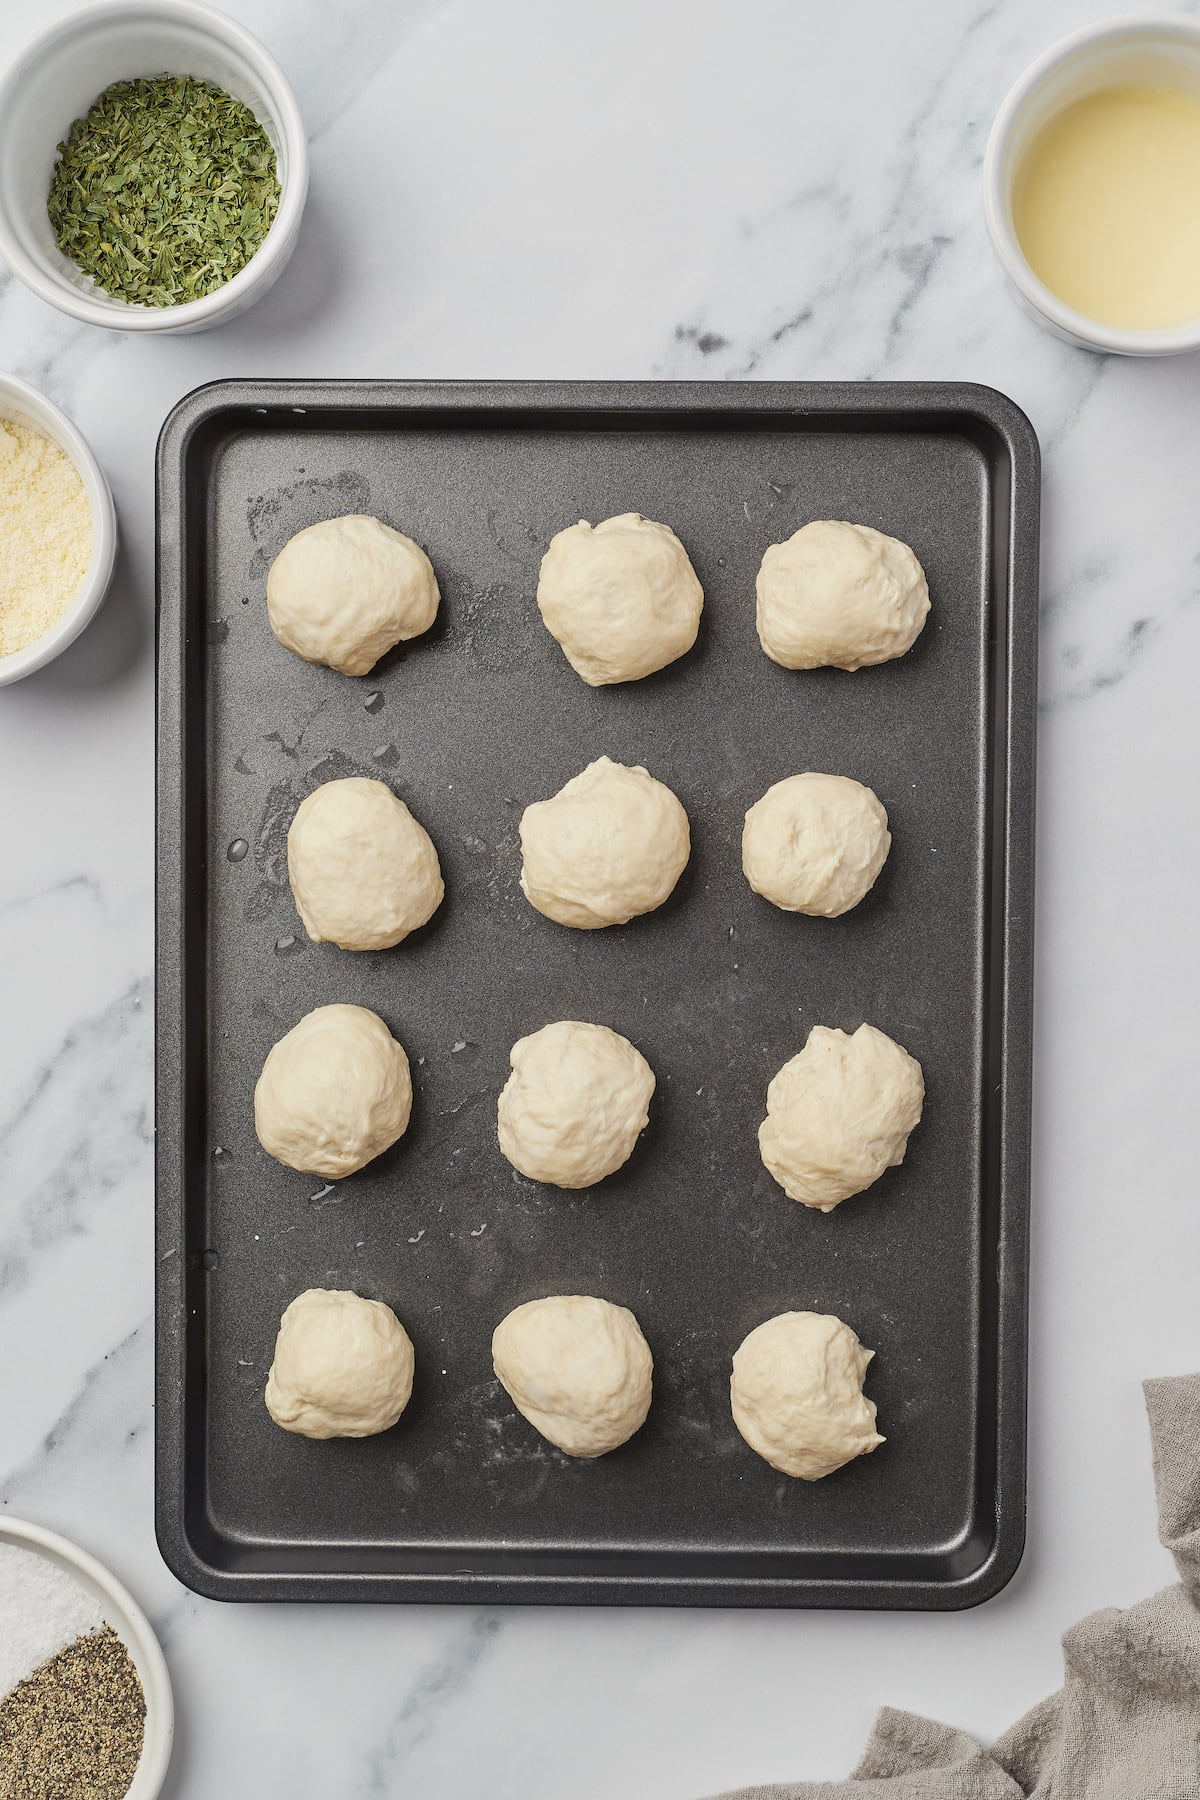 Small pieces of unbaked yeast dough on a baking sheet. Ramekins of parsley, melted butter, salt and pepper, and Parmesan are arranged around the baking sheet.